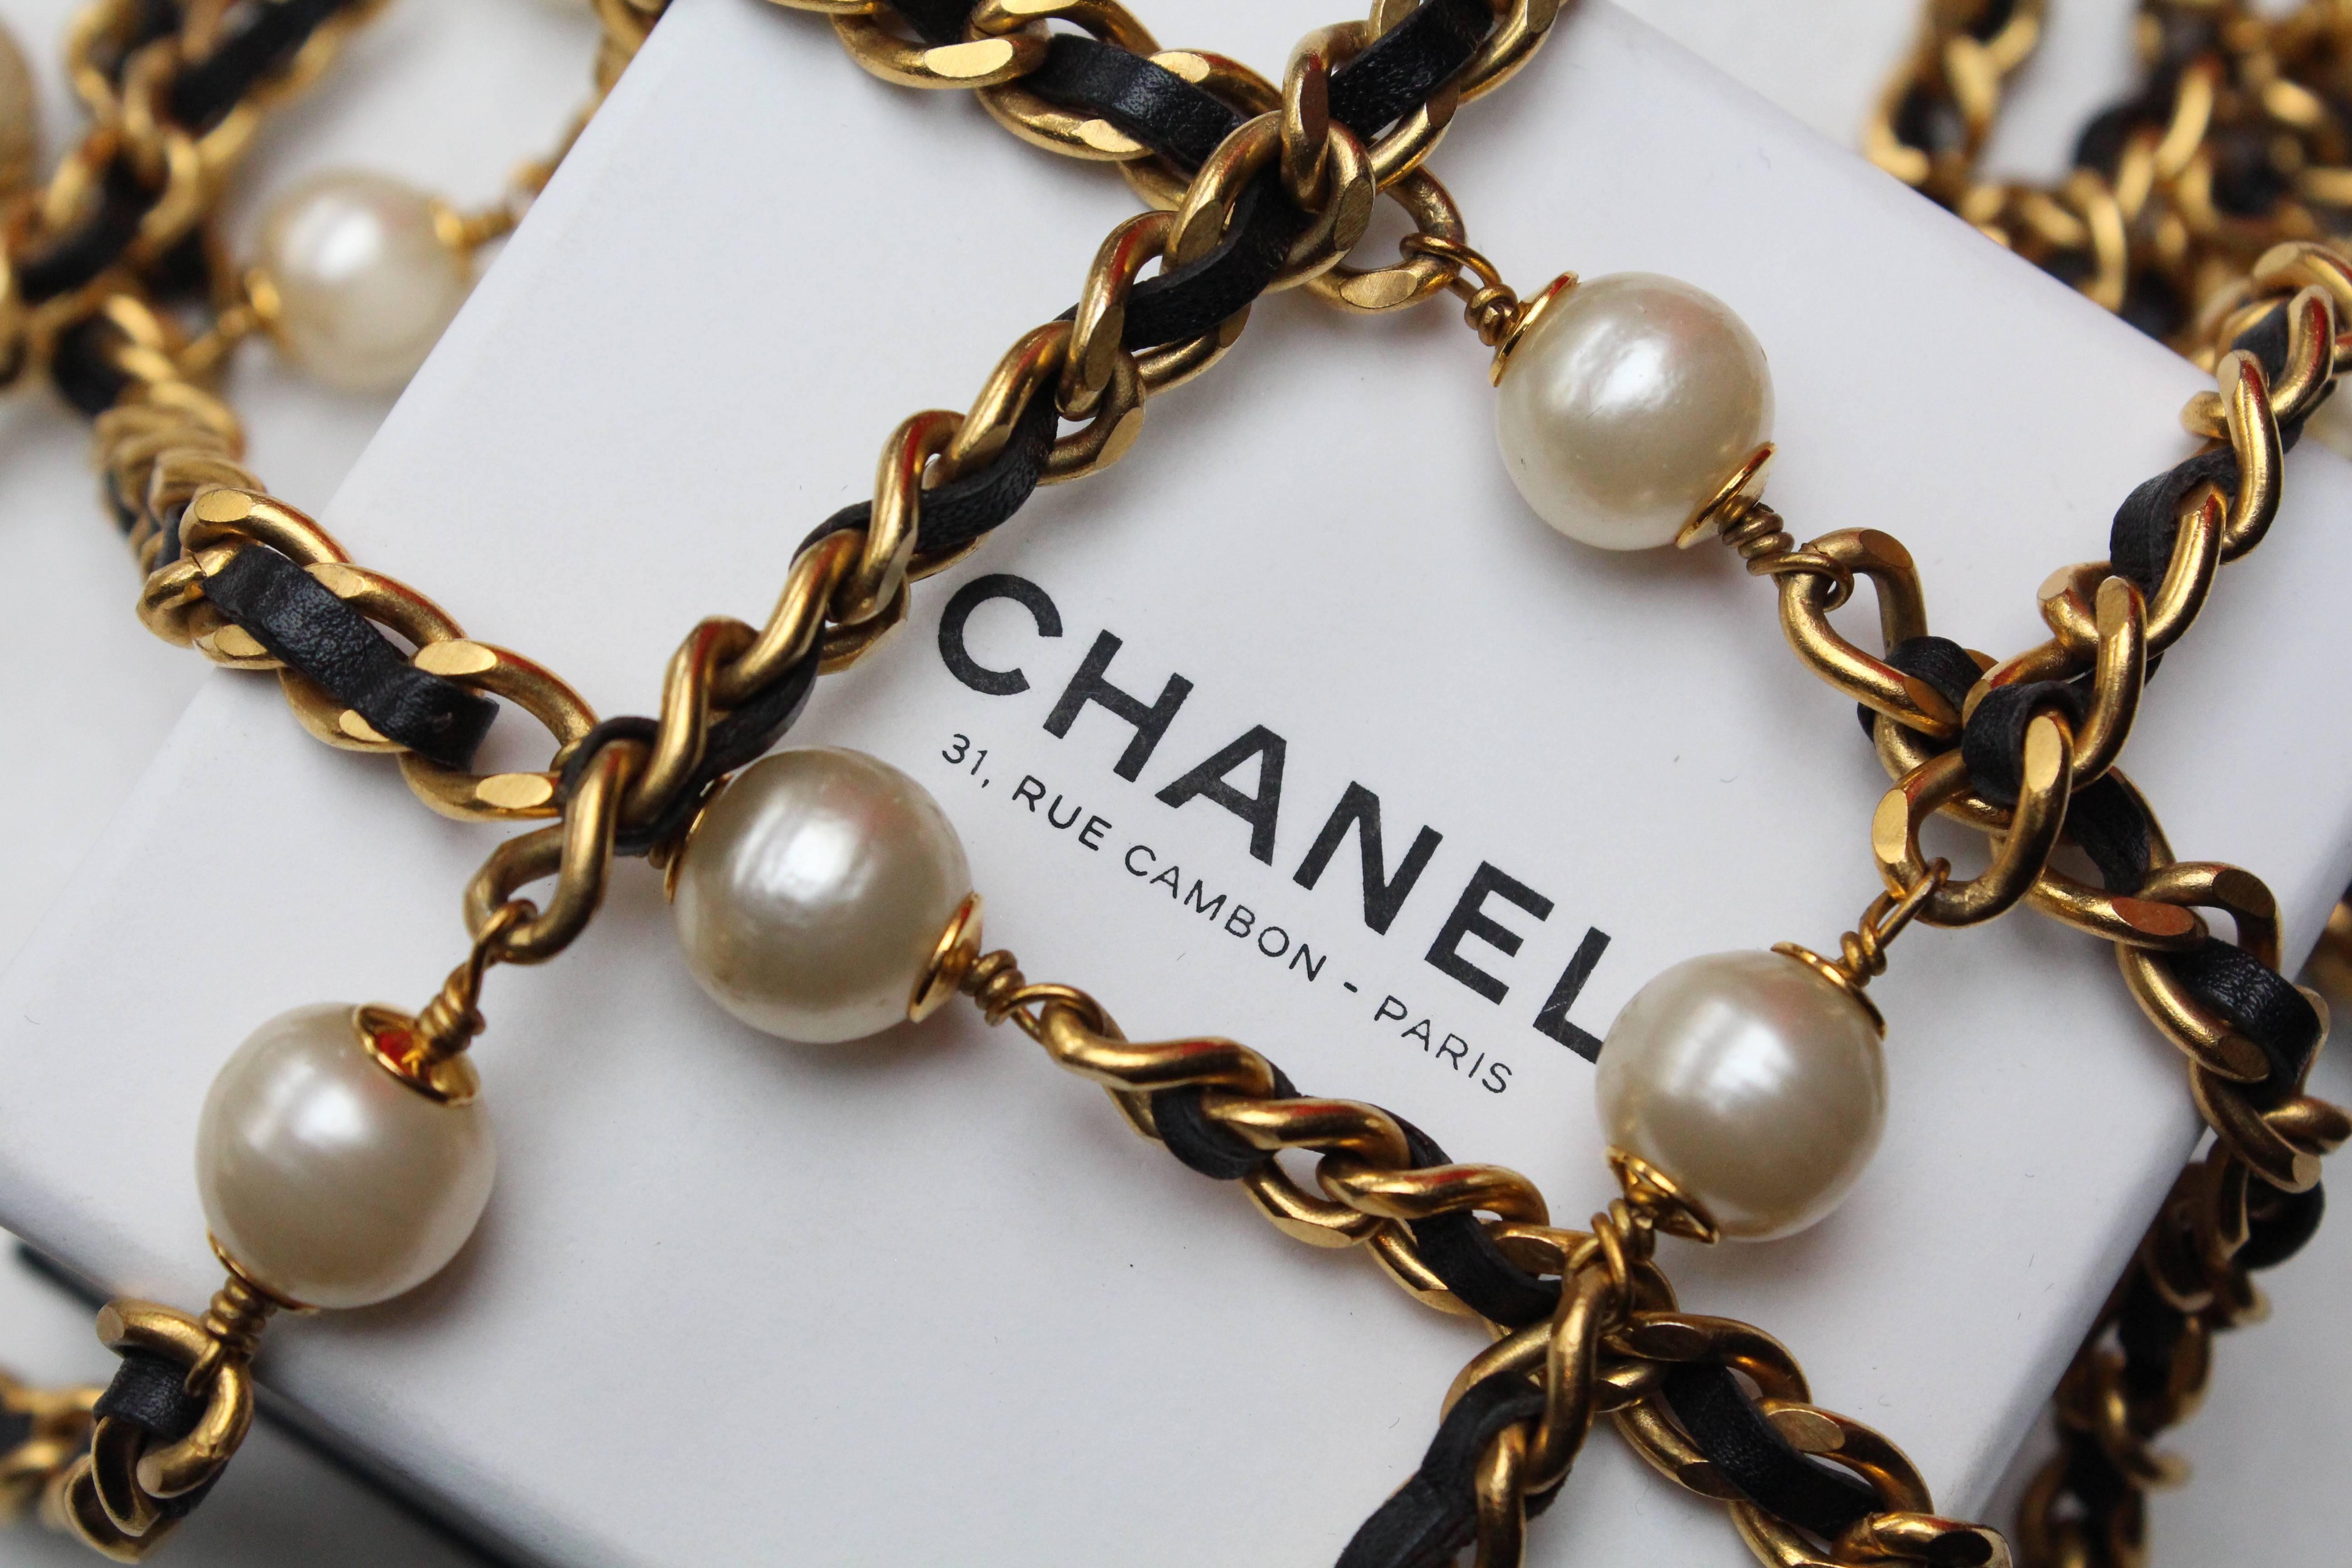 Chanel long chain sautoir composed of black leather and gilded metal chain, 1993 2